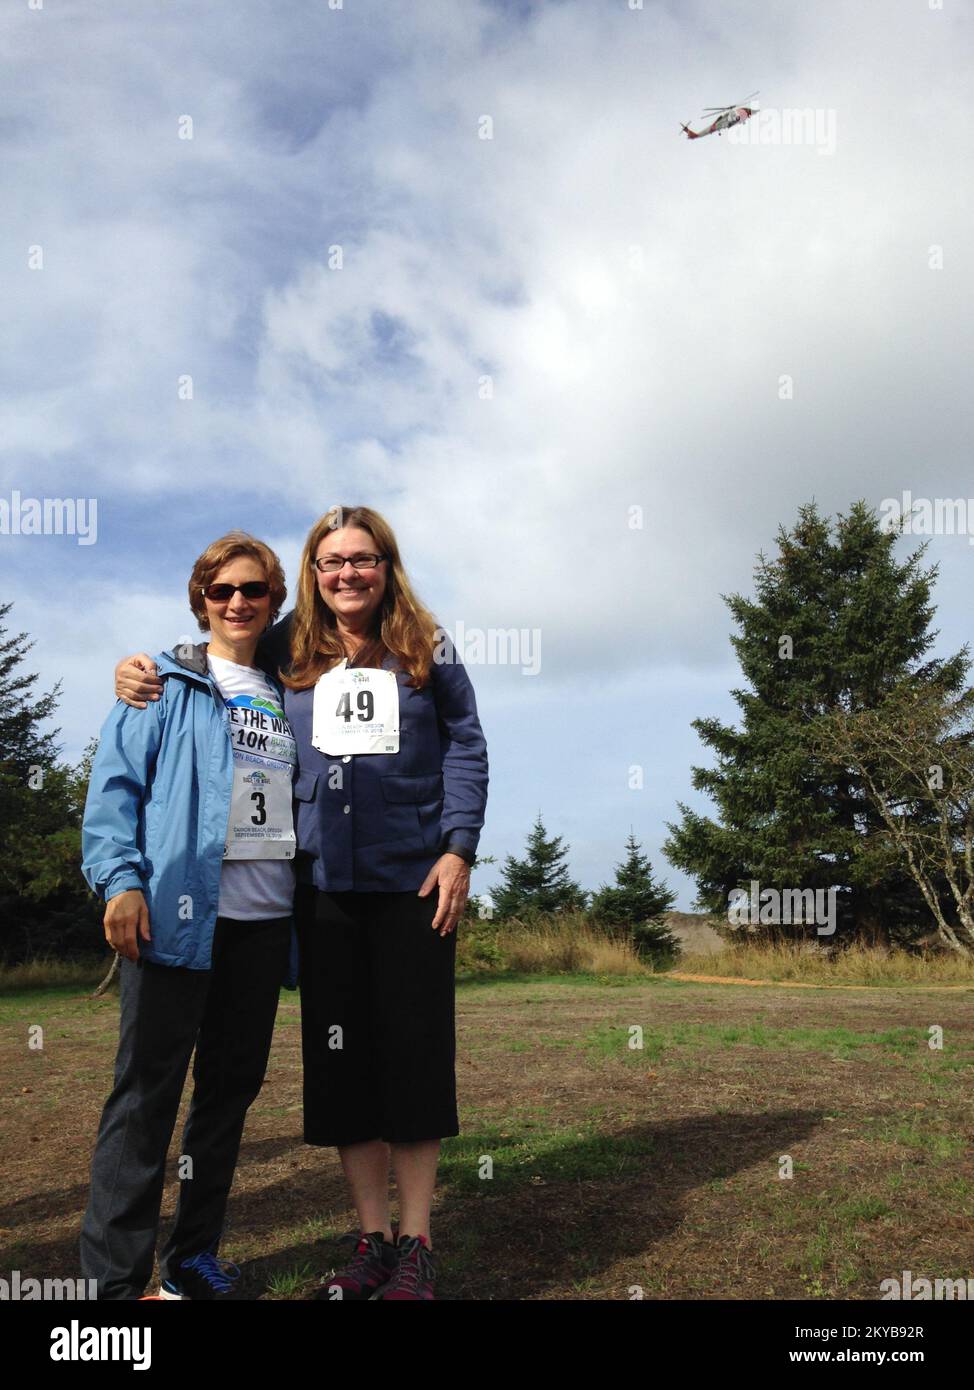 Oregon representatives Suzanne Bonamici and Debbie Boone during the re-race flyover at the starting line of Race the Wave. The race included a 2k, 5k, and 10k using local tsunami evacuation routes in Cannon Beach, Ore.. Oregon representatives Suzanne Bonamici and Debbie Boone&nbsp;during the pre-race flyover at the starting line of&nbsp; Race the Wave.&nbsp; The race included a 2k, 5k, and 10k using local tsunami evacuation routes in Cannon Beach, Ore.. Photographs Relating to Disasters and Emergency Management Programs, Activities, and Officials Stock Photo